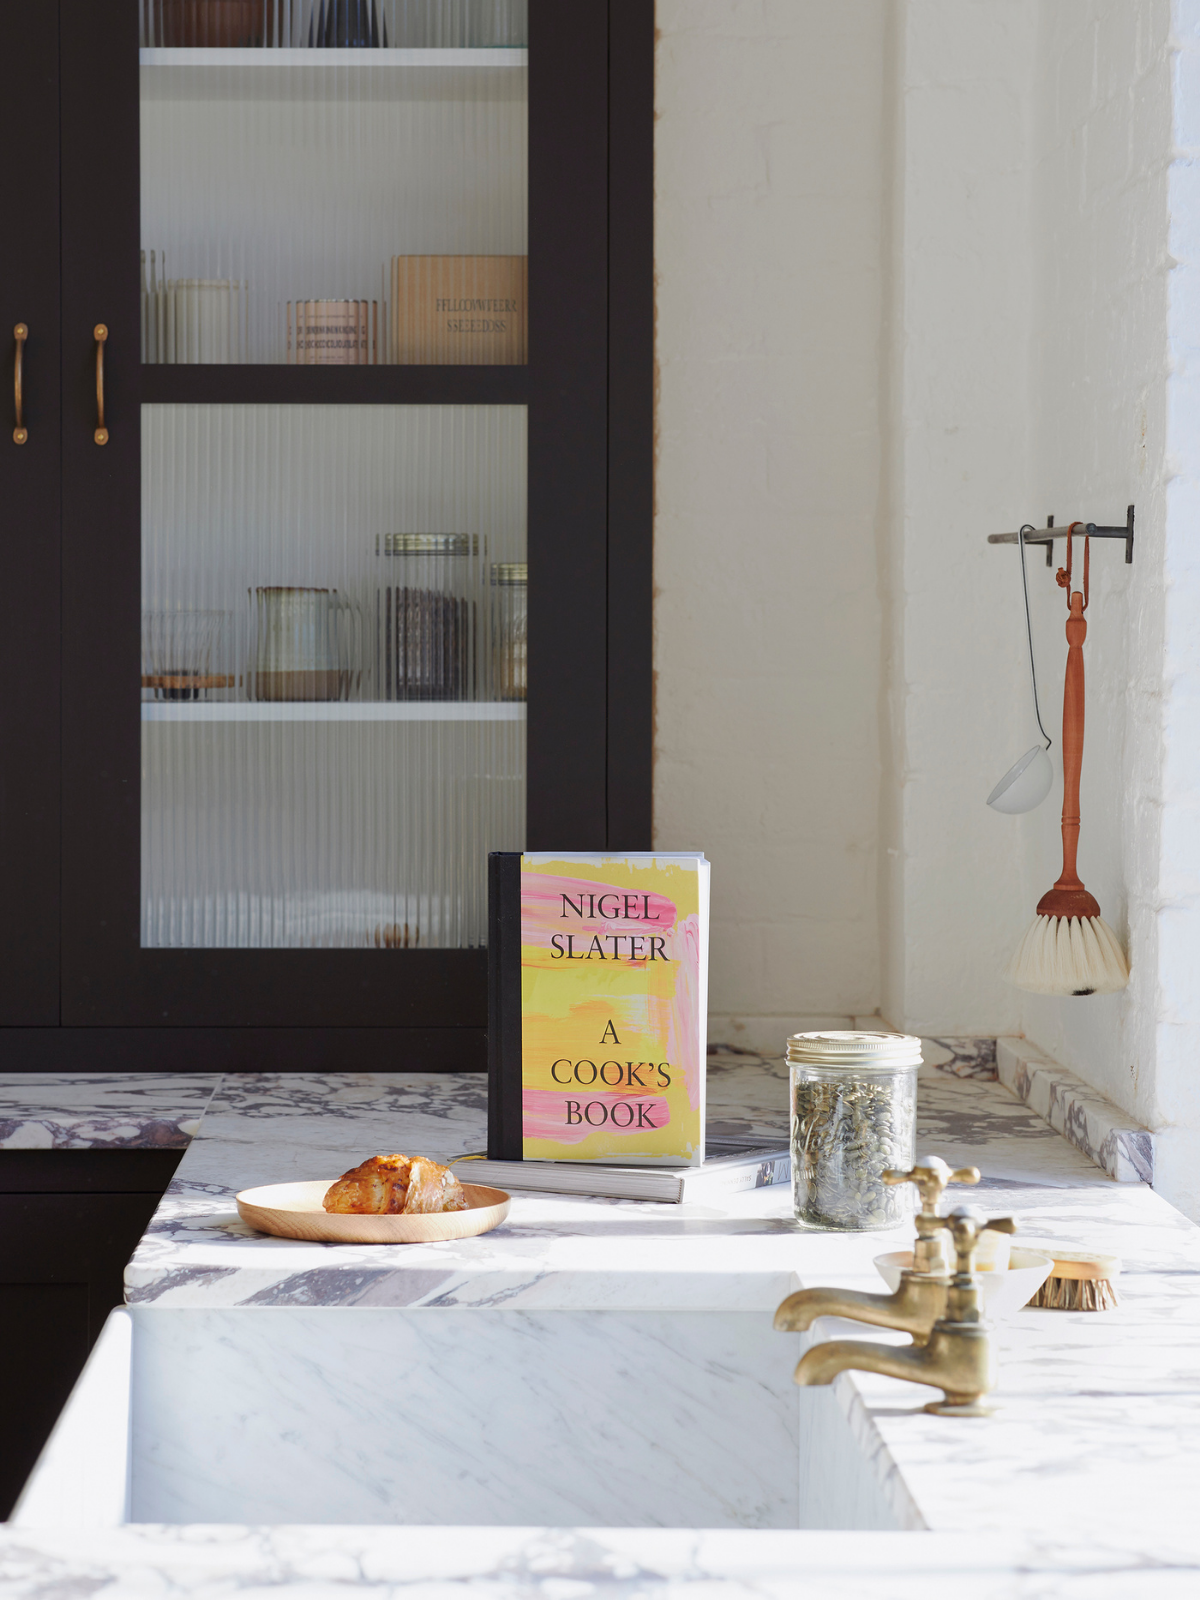 Nigel Slater's cookbook on a marble countertop in a rustic kitchen